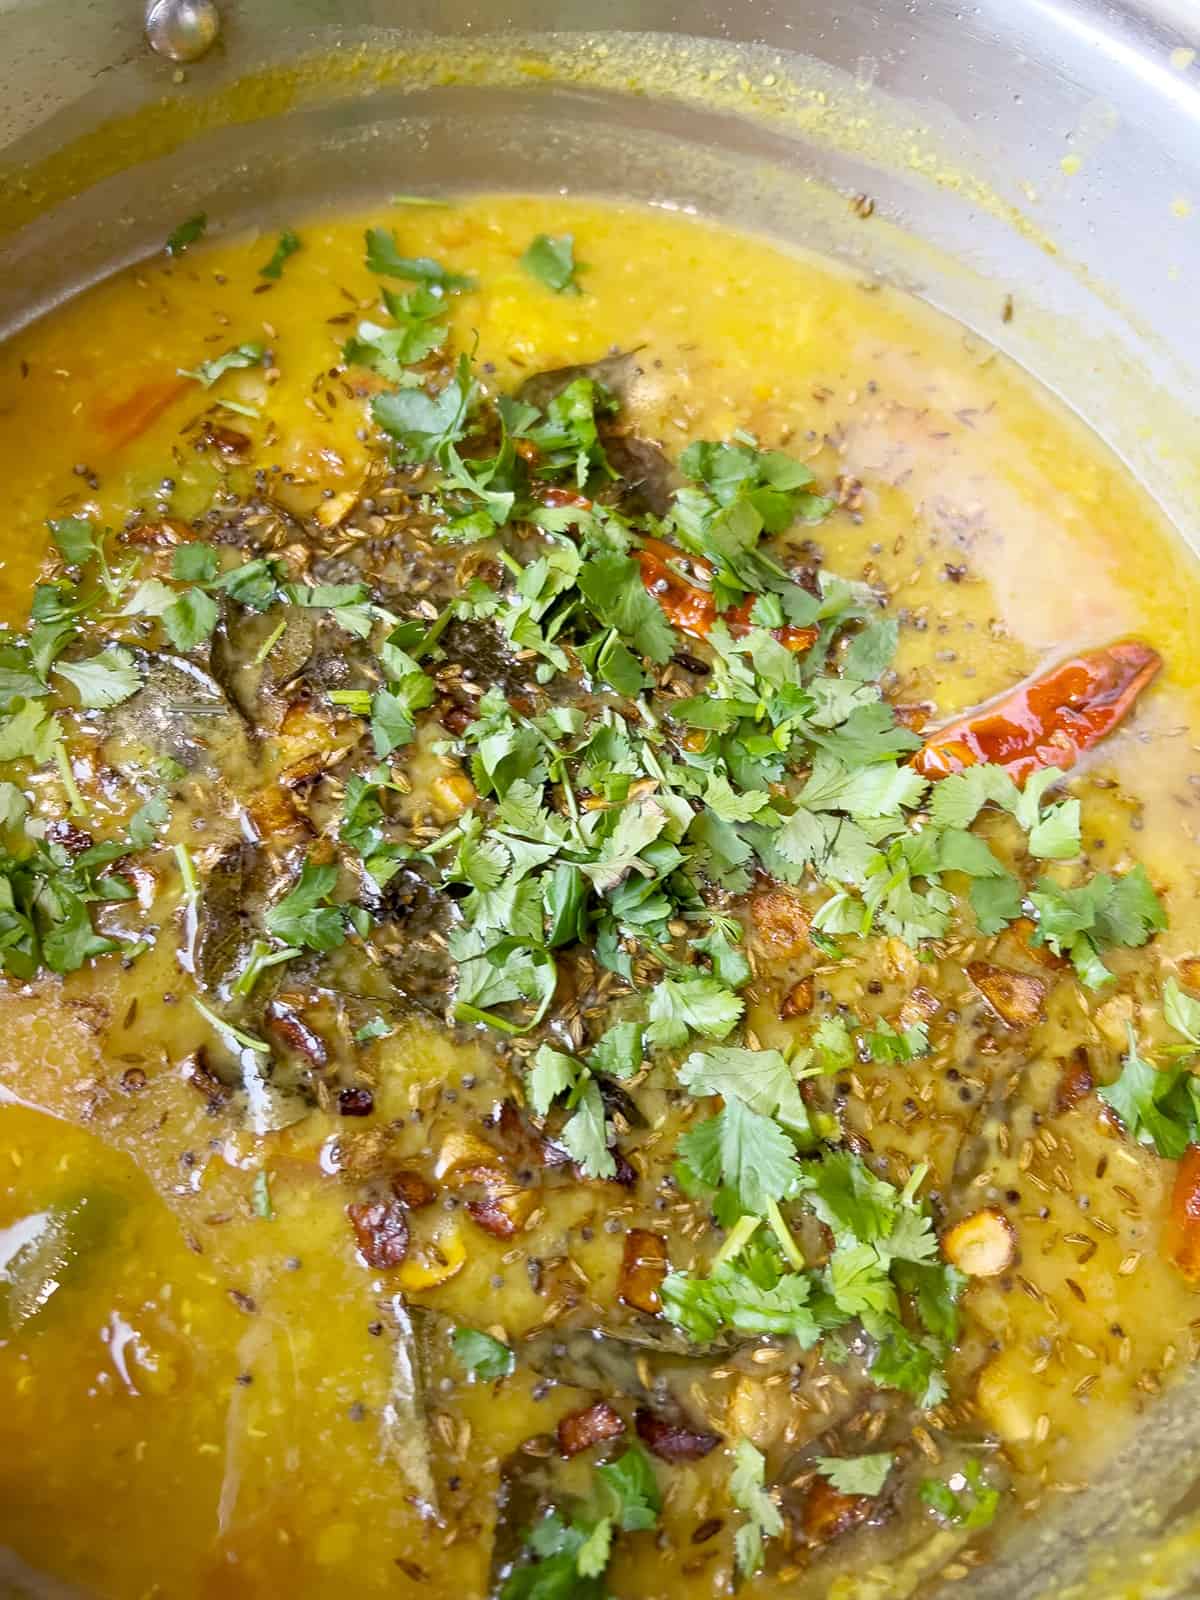 Finished lentil curry (khatti dal) in the cooking pot is tempered and garnished with cilantro.